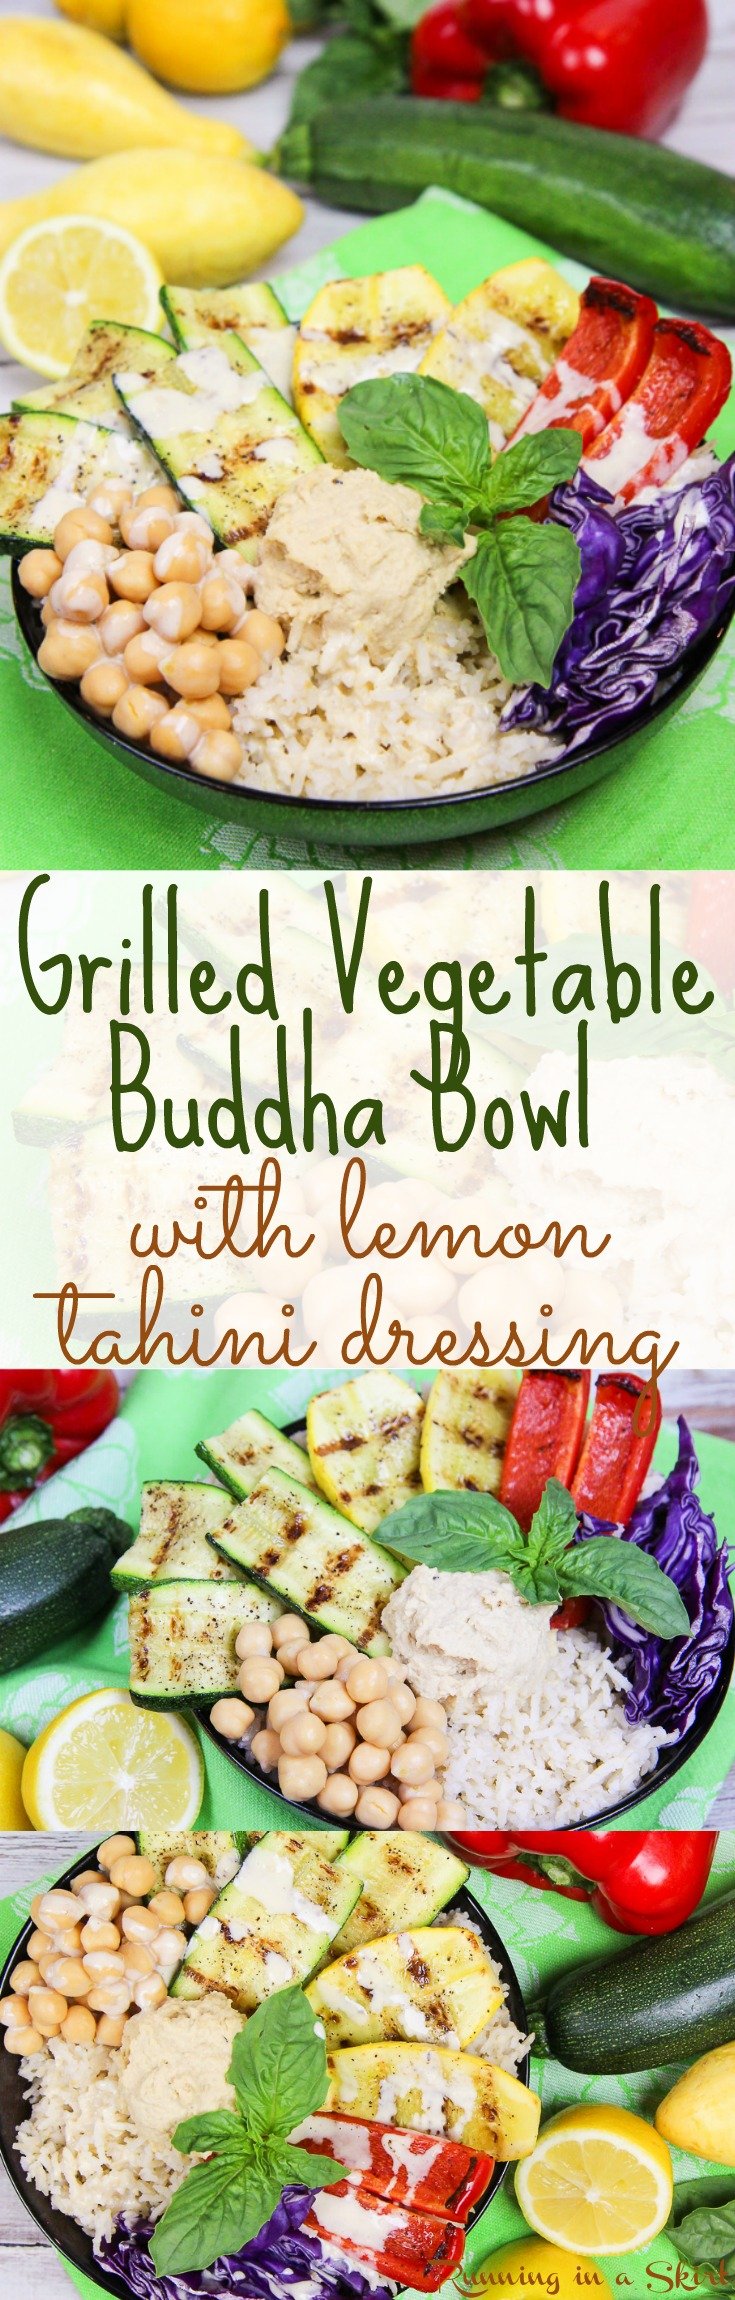 Vegan Grilled Vegetable Buddha Bowl with Homemade Lemon Tahini Dressing. A clean eating, healthy and gluten free recipe that great for lunches or dinners. The perfect healthy meals idea with a tasty sauce. With brown rice, but you can sub any grain like quinoa. Also vegetarian & dairy free. / Running in a Skirt via @juliewunder